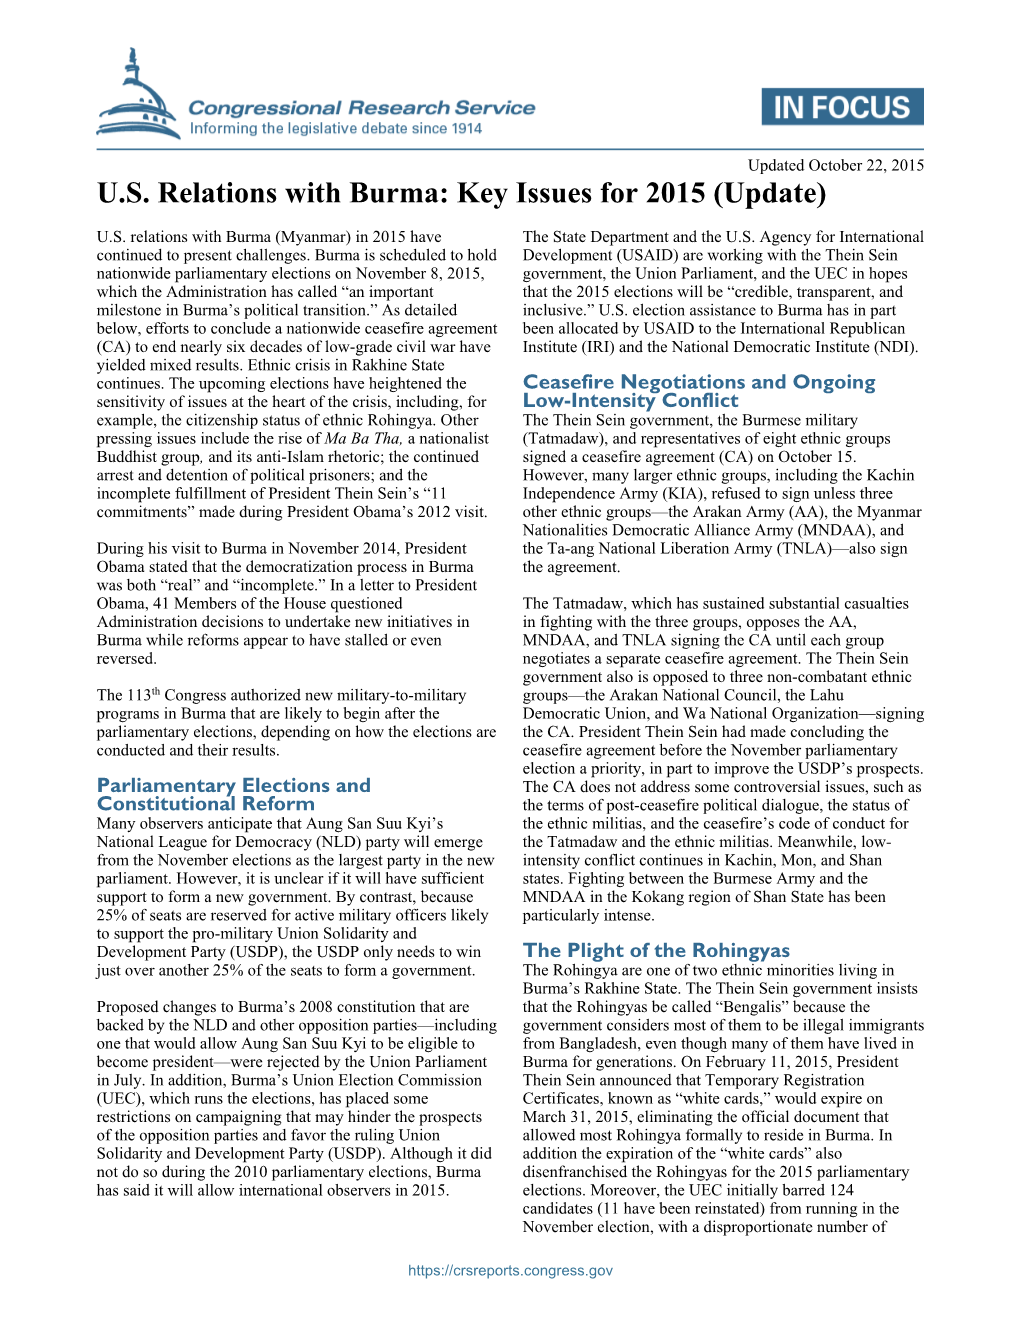 US Relations with Burma: Key Issues for 2015